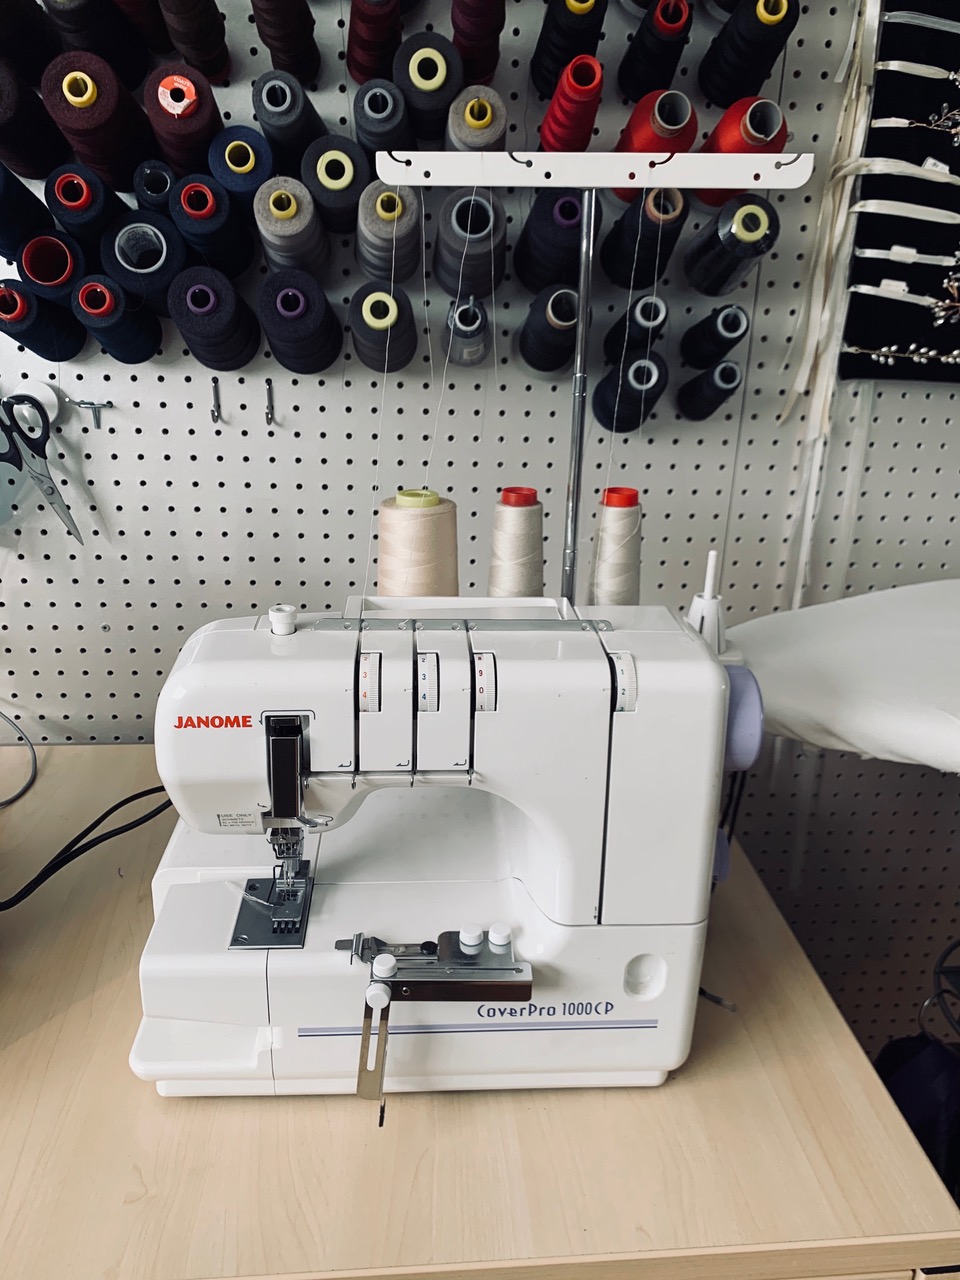 Val's Sewing Room in Canada - Threads